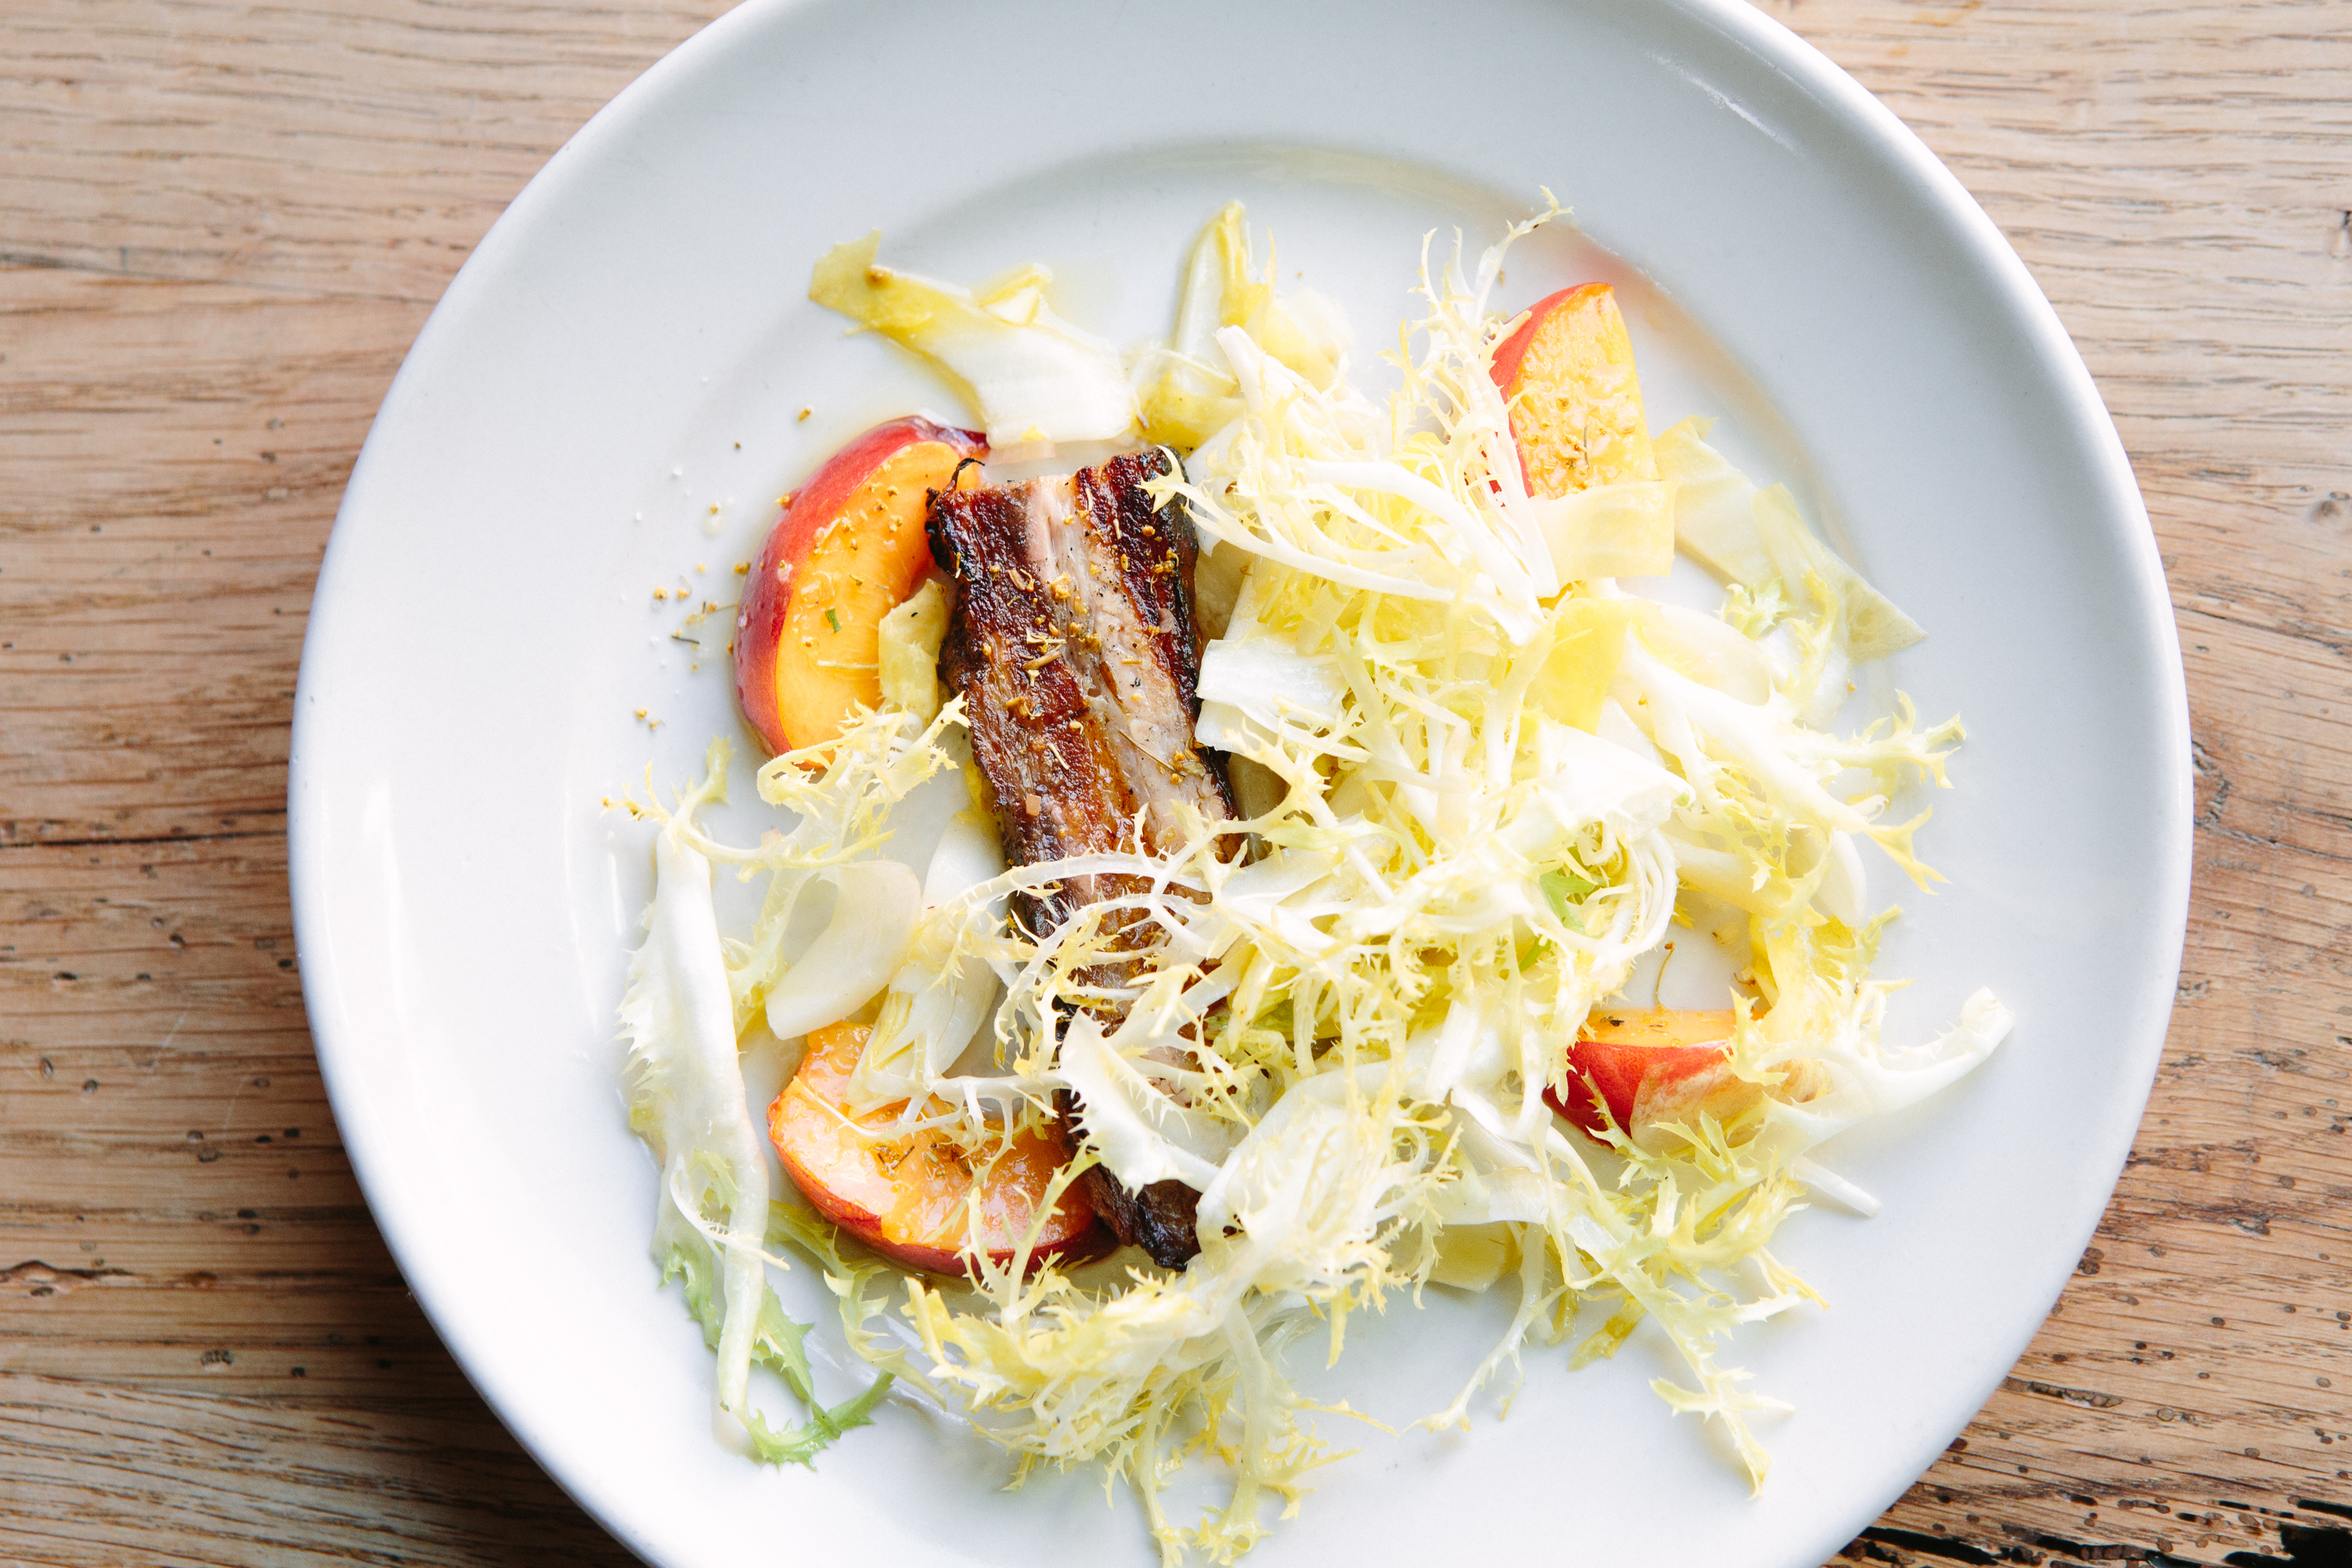 Roast Pork Belly with Nectarines, Frisée and Endive at Bar Agricole